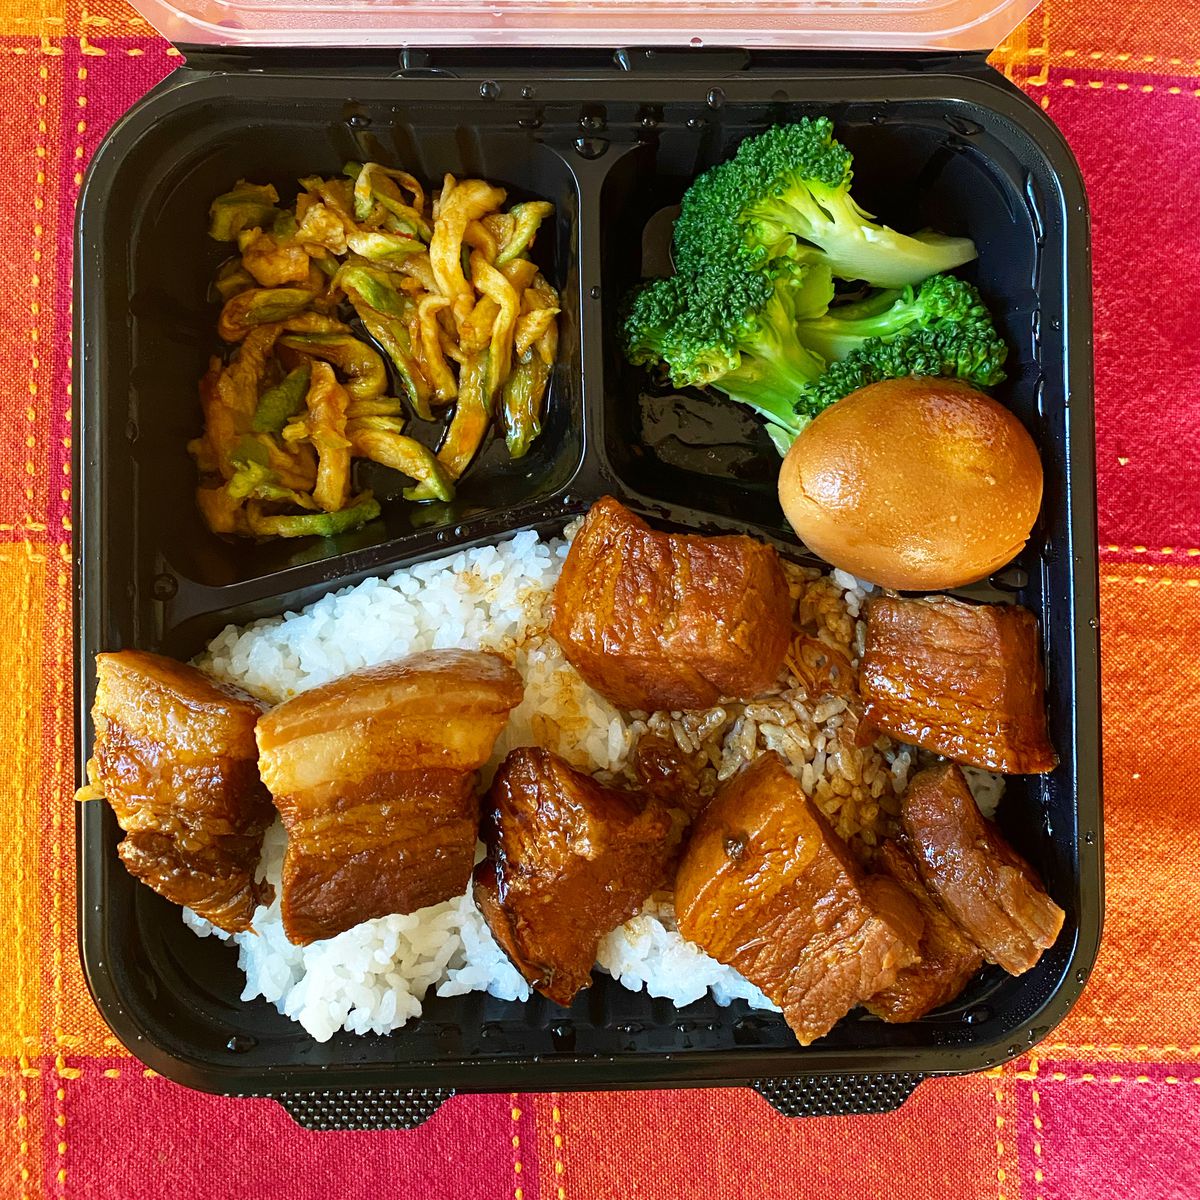 Shanghainese red braised pork at No. 1 Express in Arcadia in a plastic takeout container.